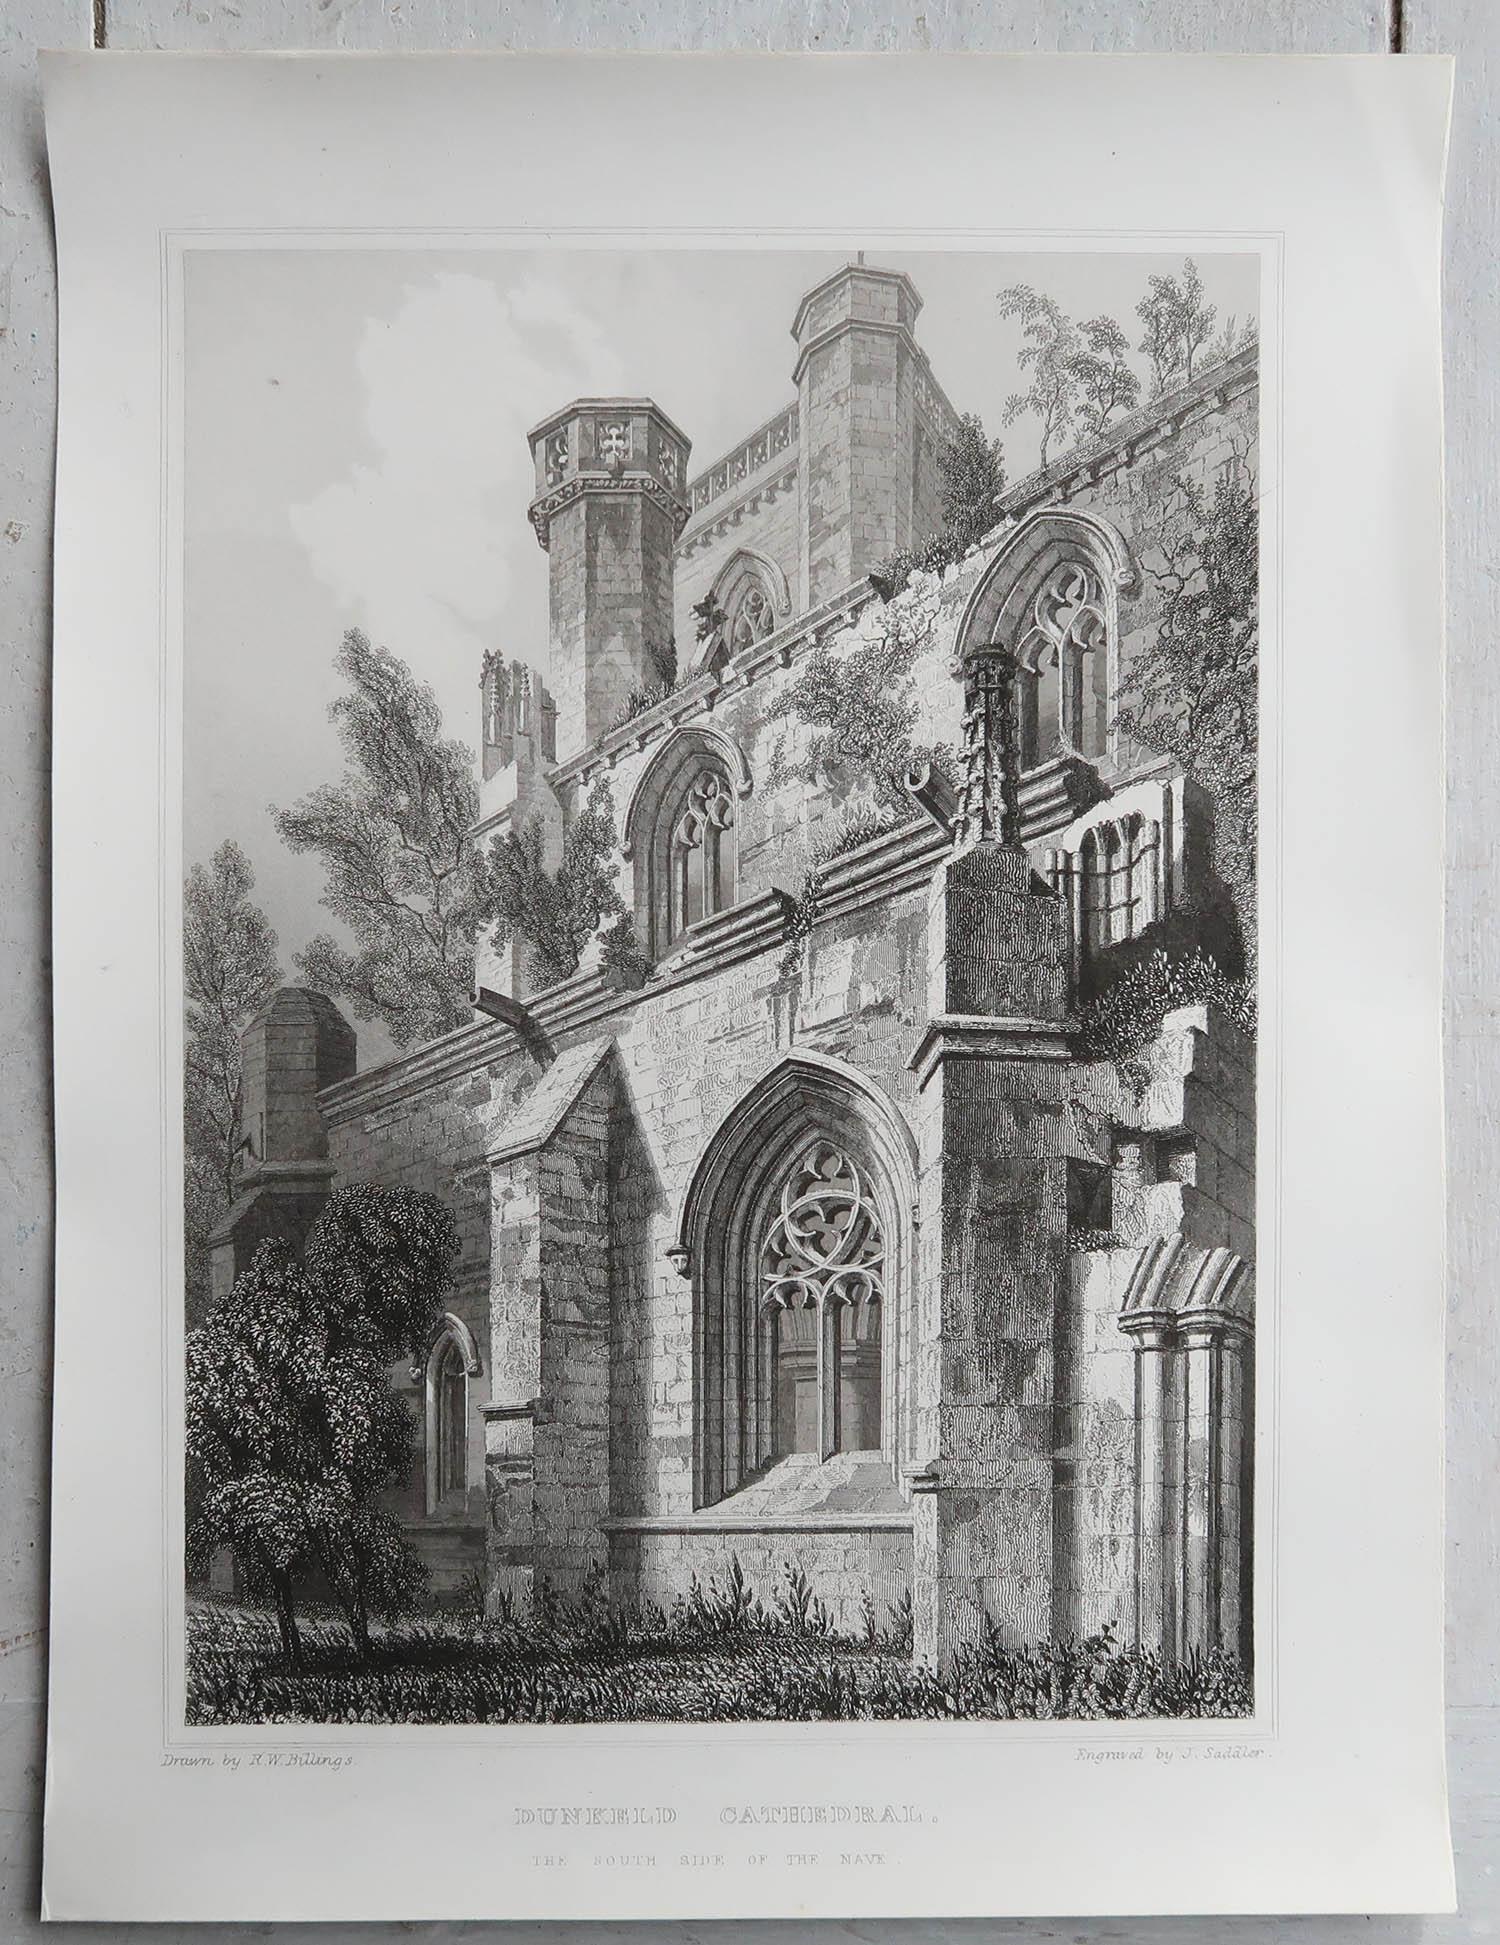 Paper Set of 18 Gothic Architectural Prints After Robert William Billings, Dated, 1848